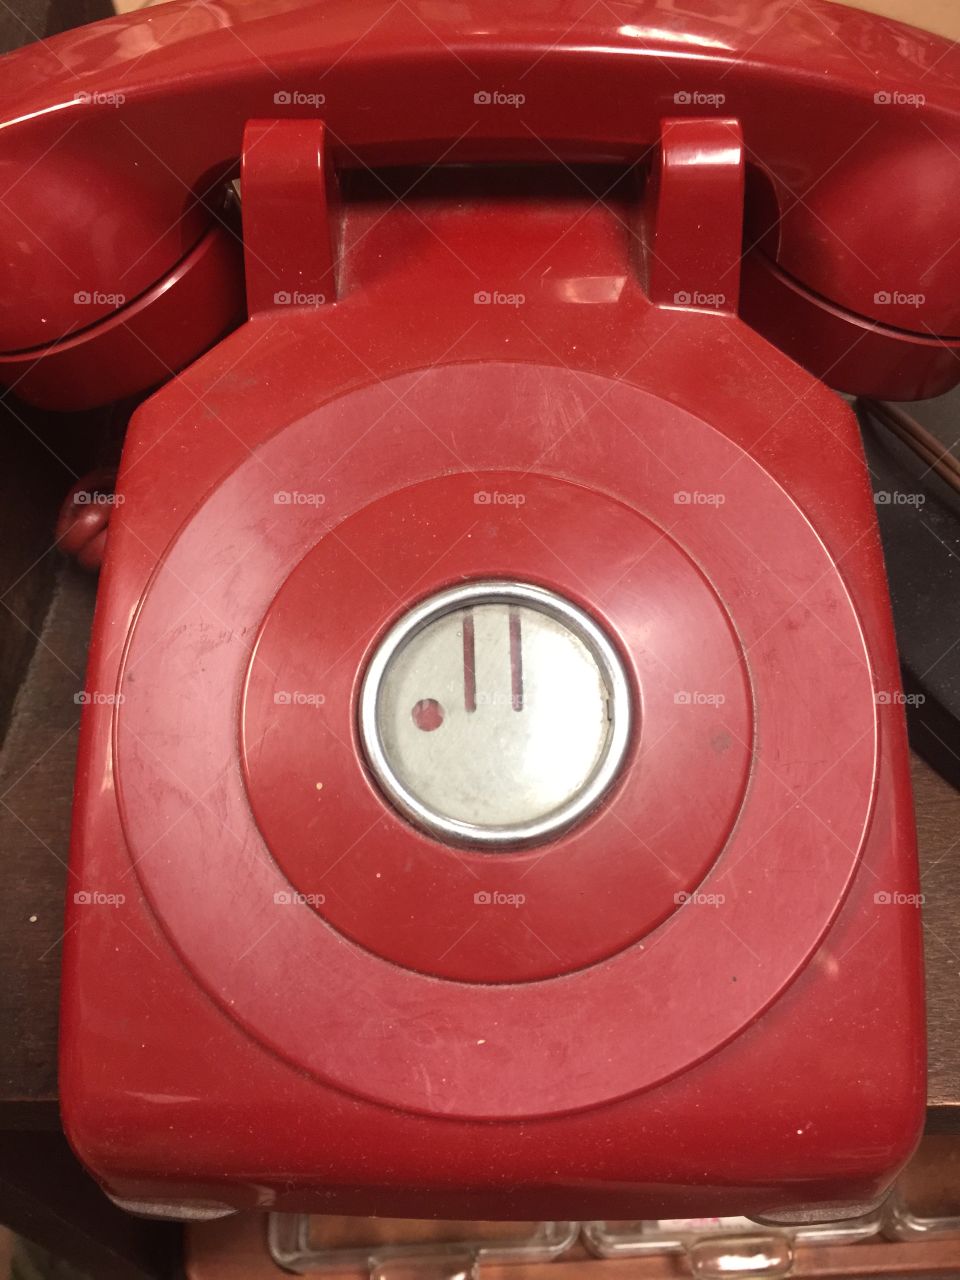 Red  phone